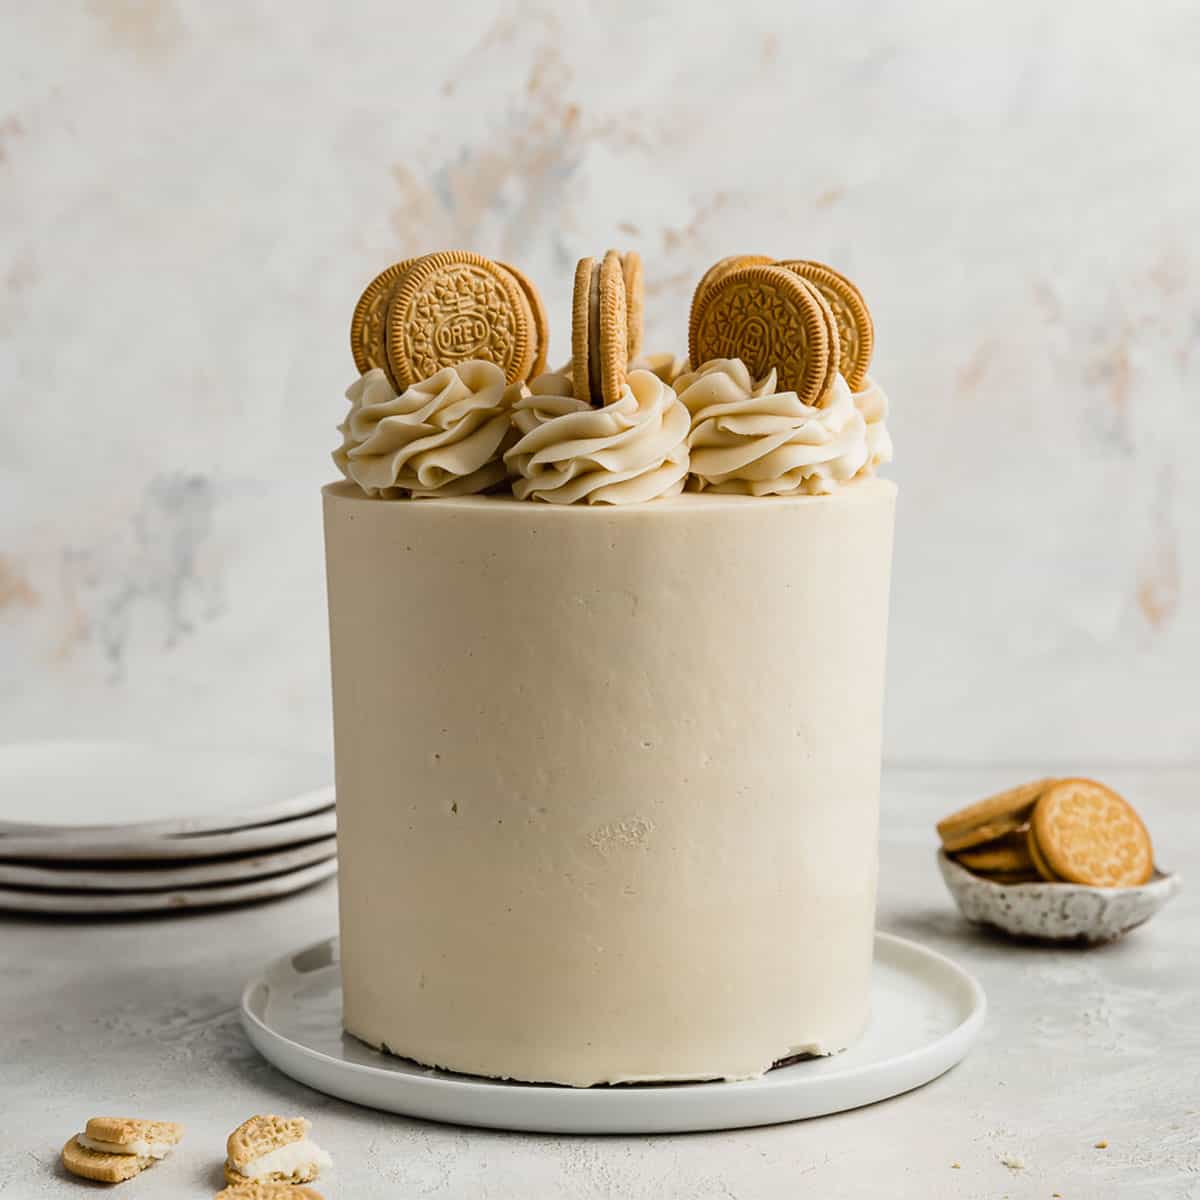 A three layer Golden Oreo Cake on a white plate against a white textured background.